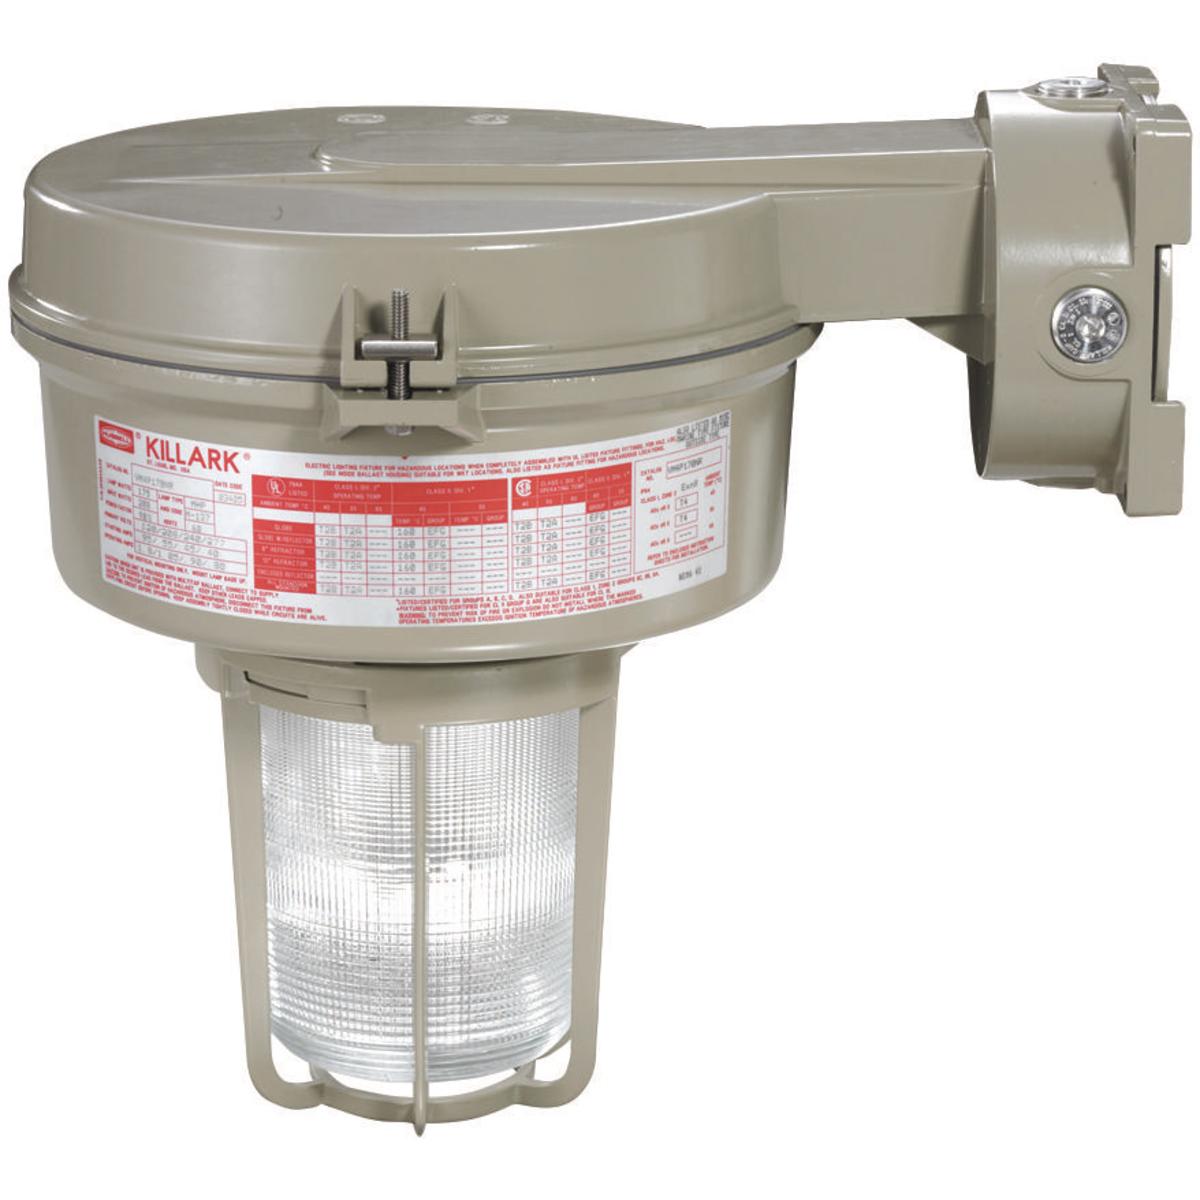 Hubbell VM3P155B2GLG VM3 Series - 150W Metal Halide 480V - 3/4" Wall Mount - Globe and Guard  ; Ballast tank and splice box – corrosion resistant copper-free aluminum alloy with baked powder epoxy/polyester finish, electrostatically applied for complete, uniform corrosion pro